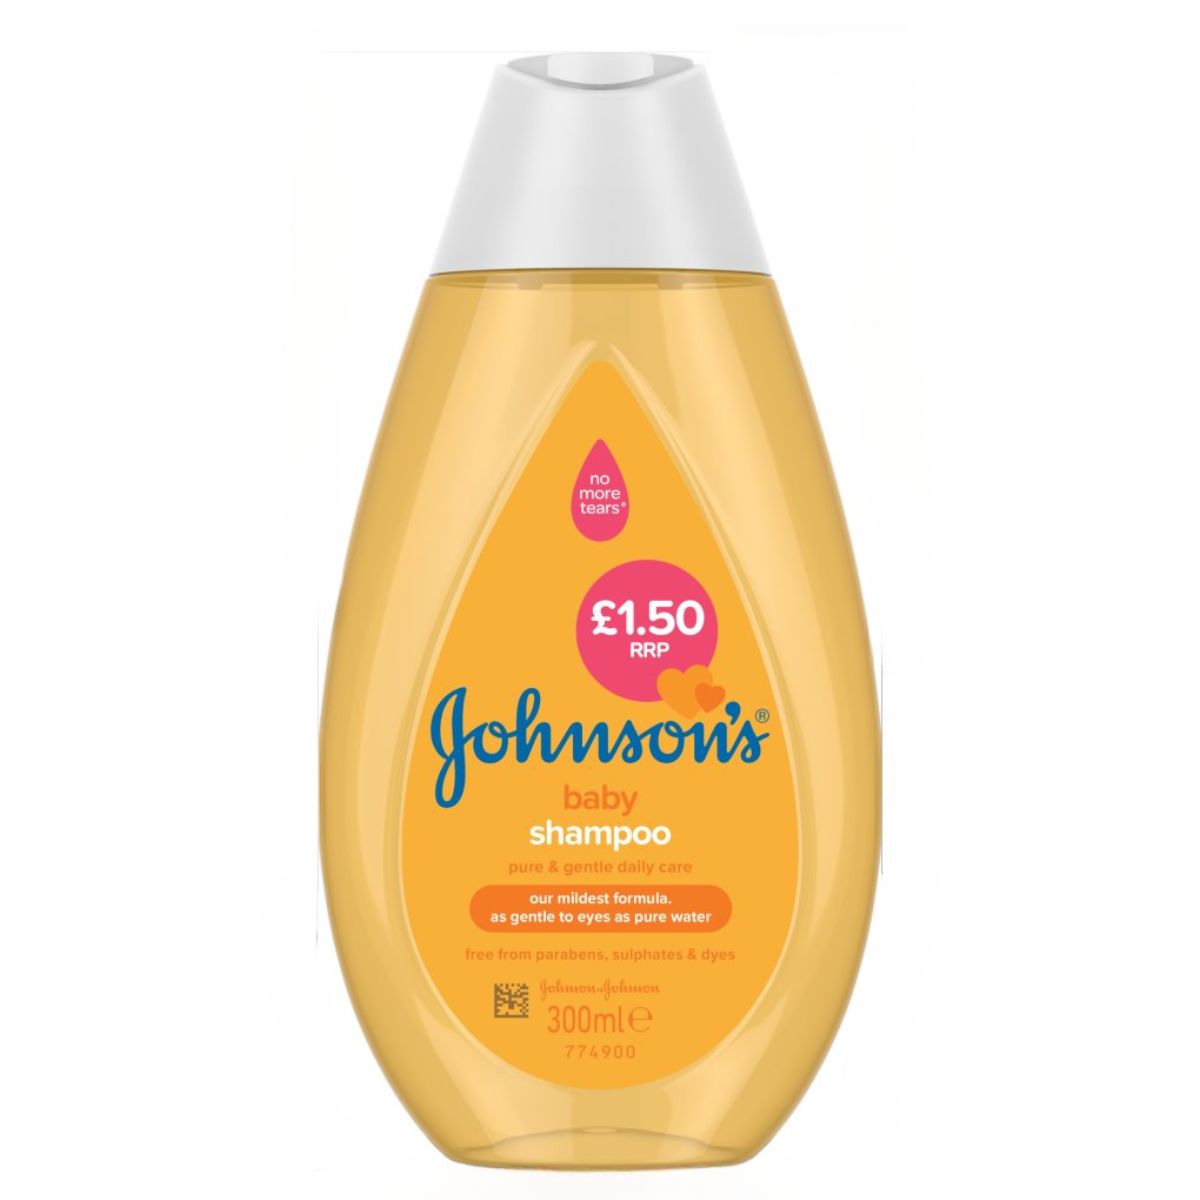 Bottle of Johnsons - Baby Shampoo - 300ml with a no more tears formula, priced at £1.50.